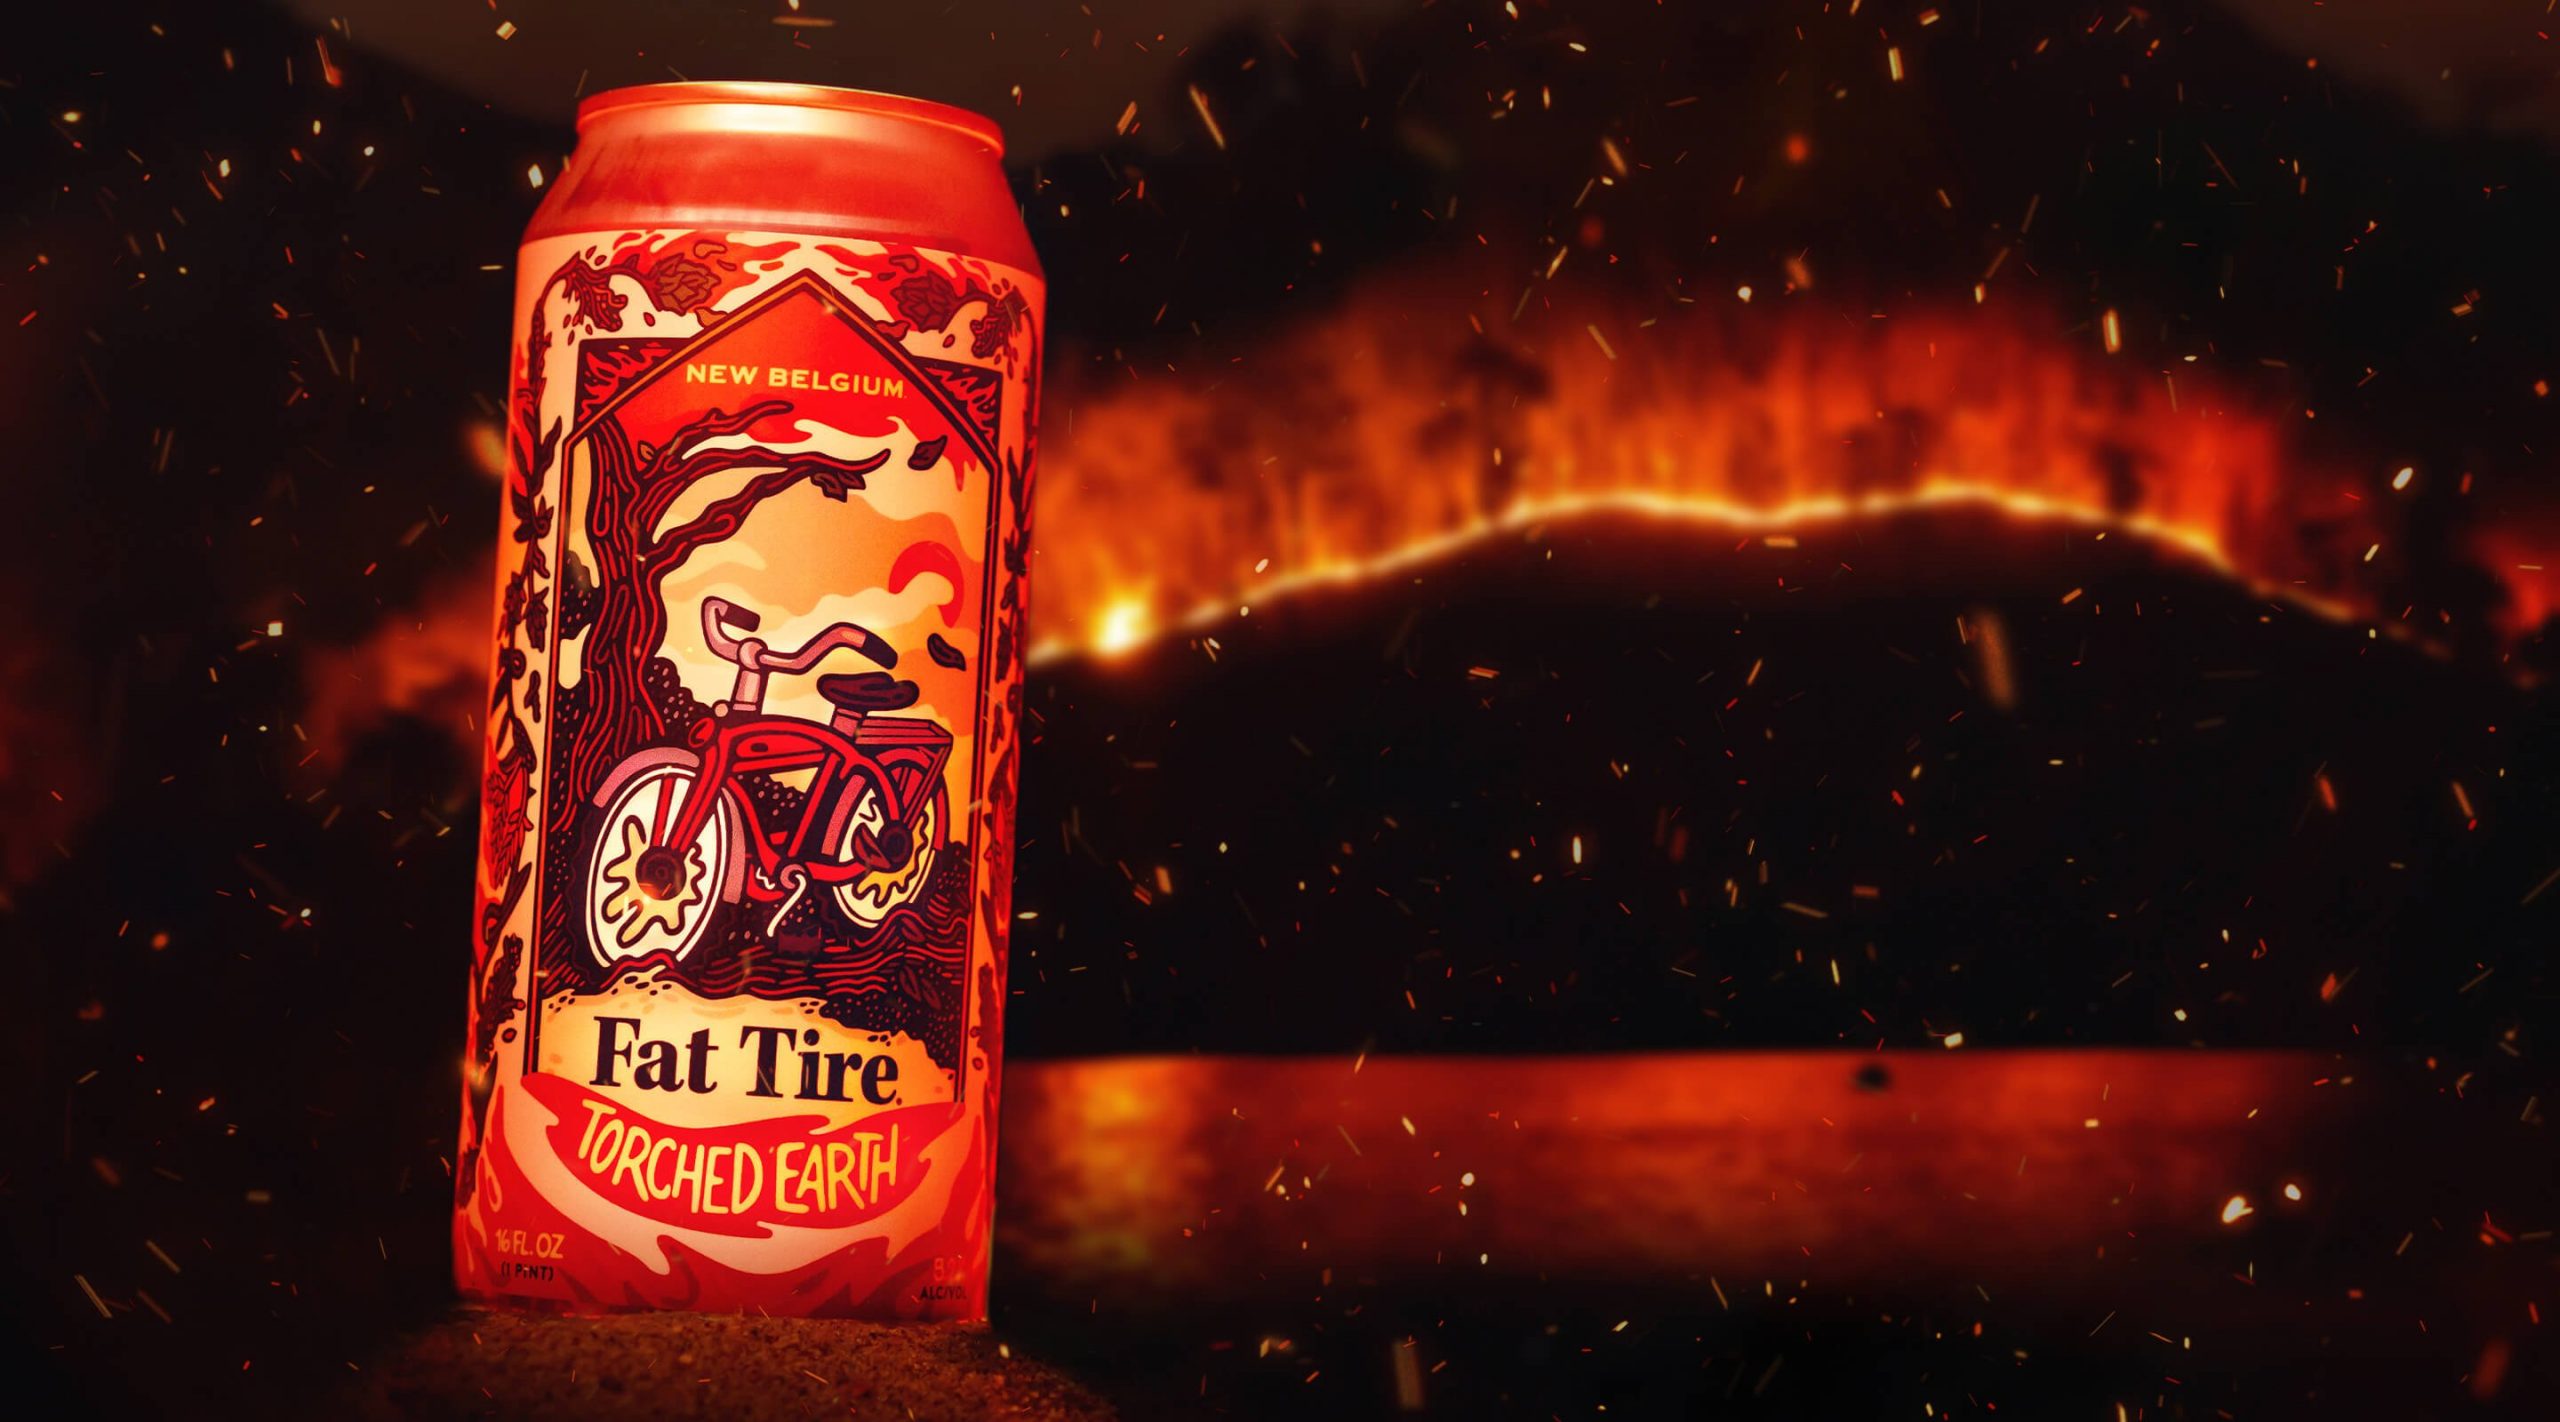 New Belgium Fat Tire Torched Earth